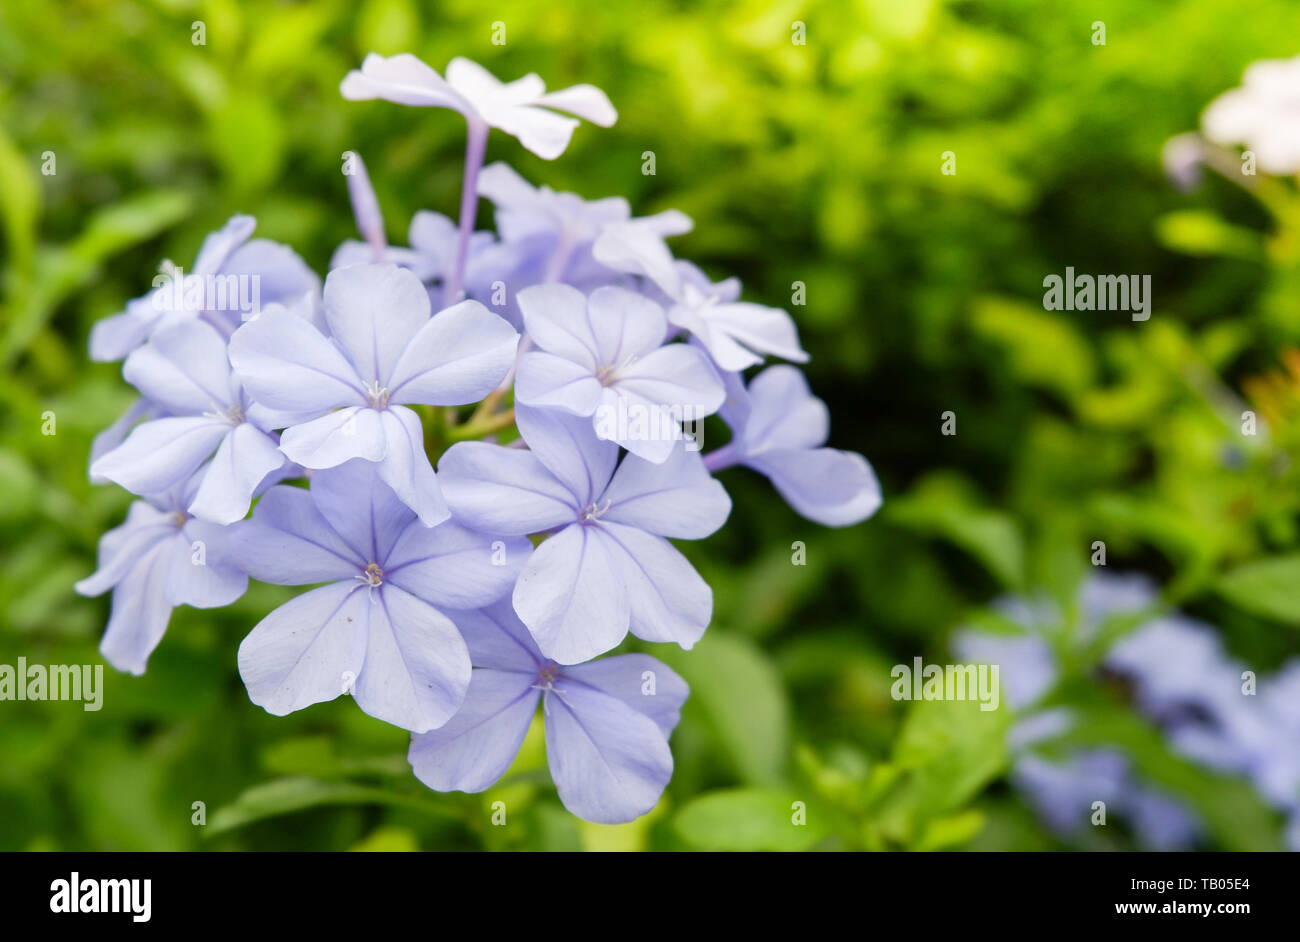 Beautiful purple flower tropical blooming in the garden nature green leaf background Stock Photo